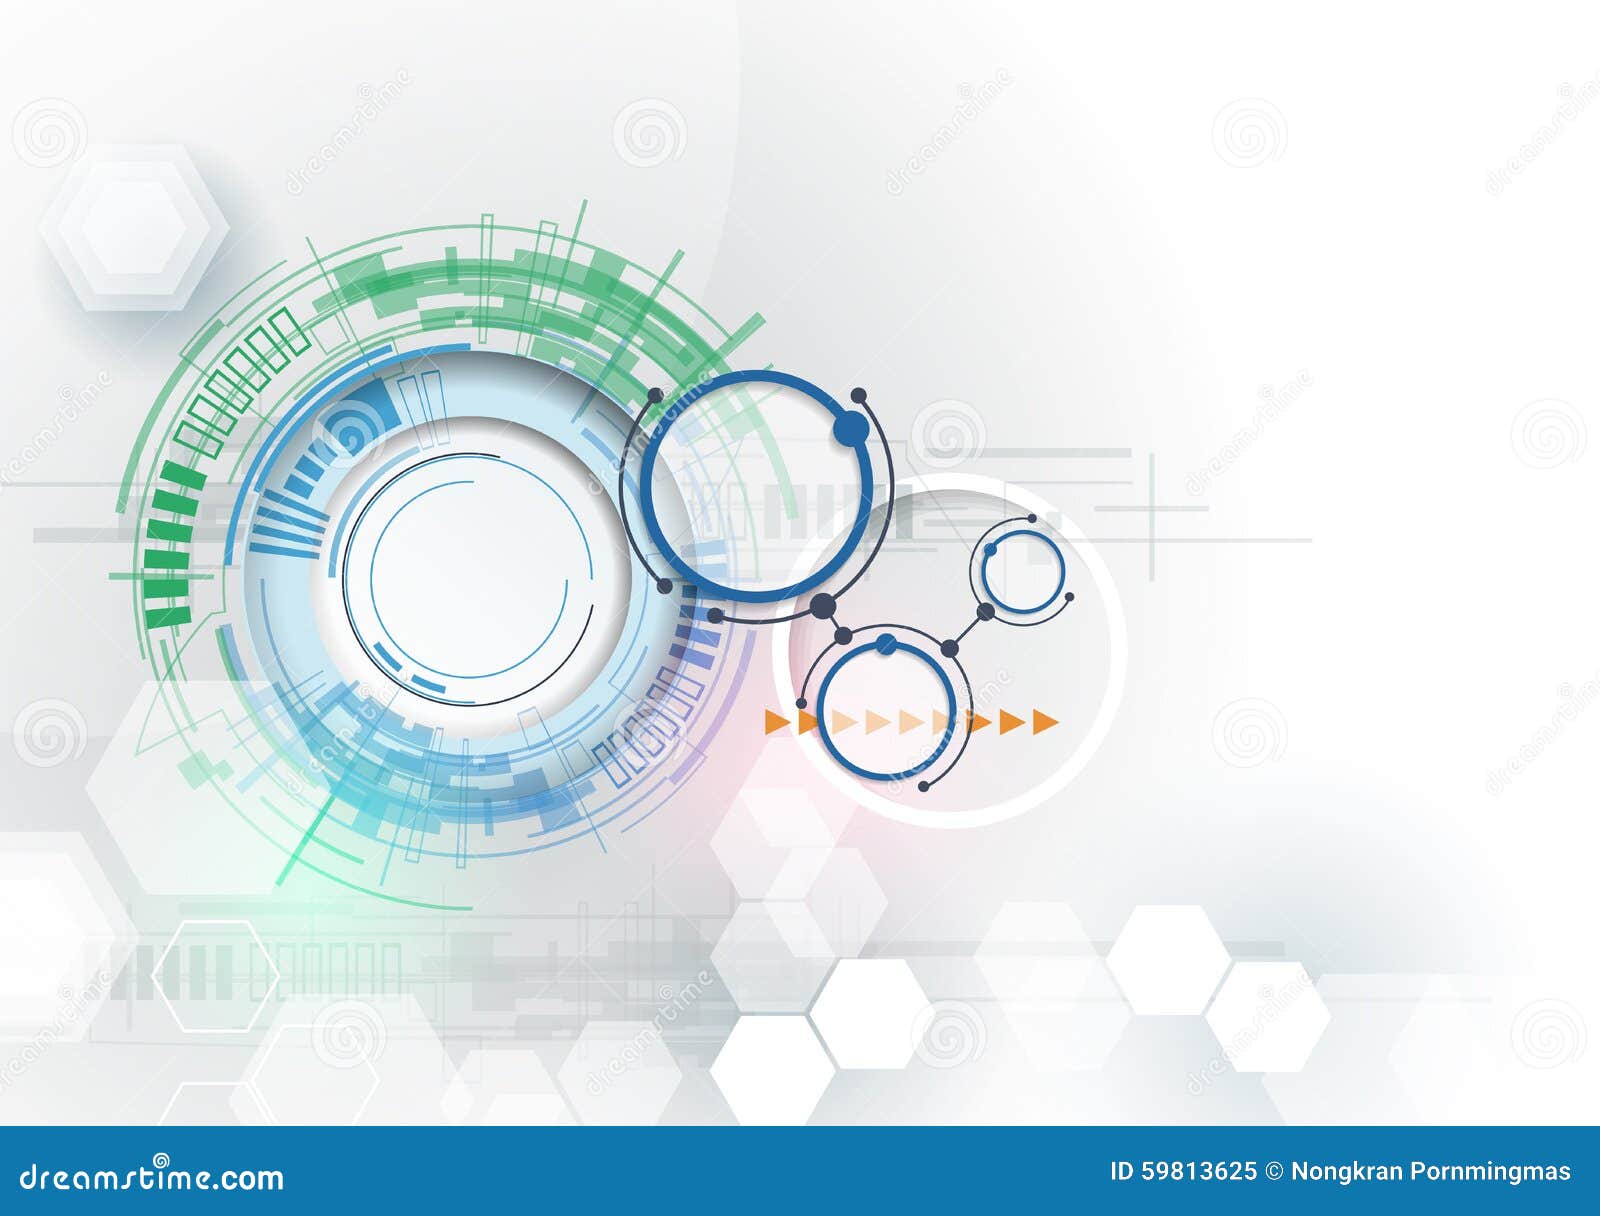 Vector illustration Hi-tech digital technology engineering. Integration and innovation technology concept. Abstract futuristic on light color background for design template, business tech presentation